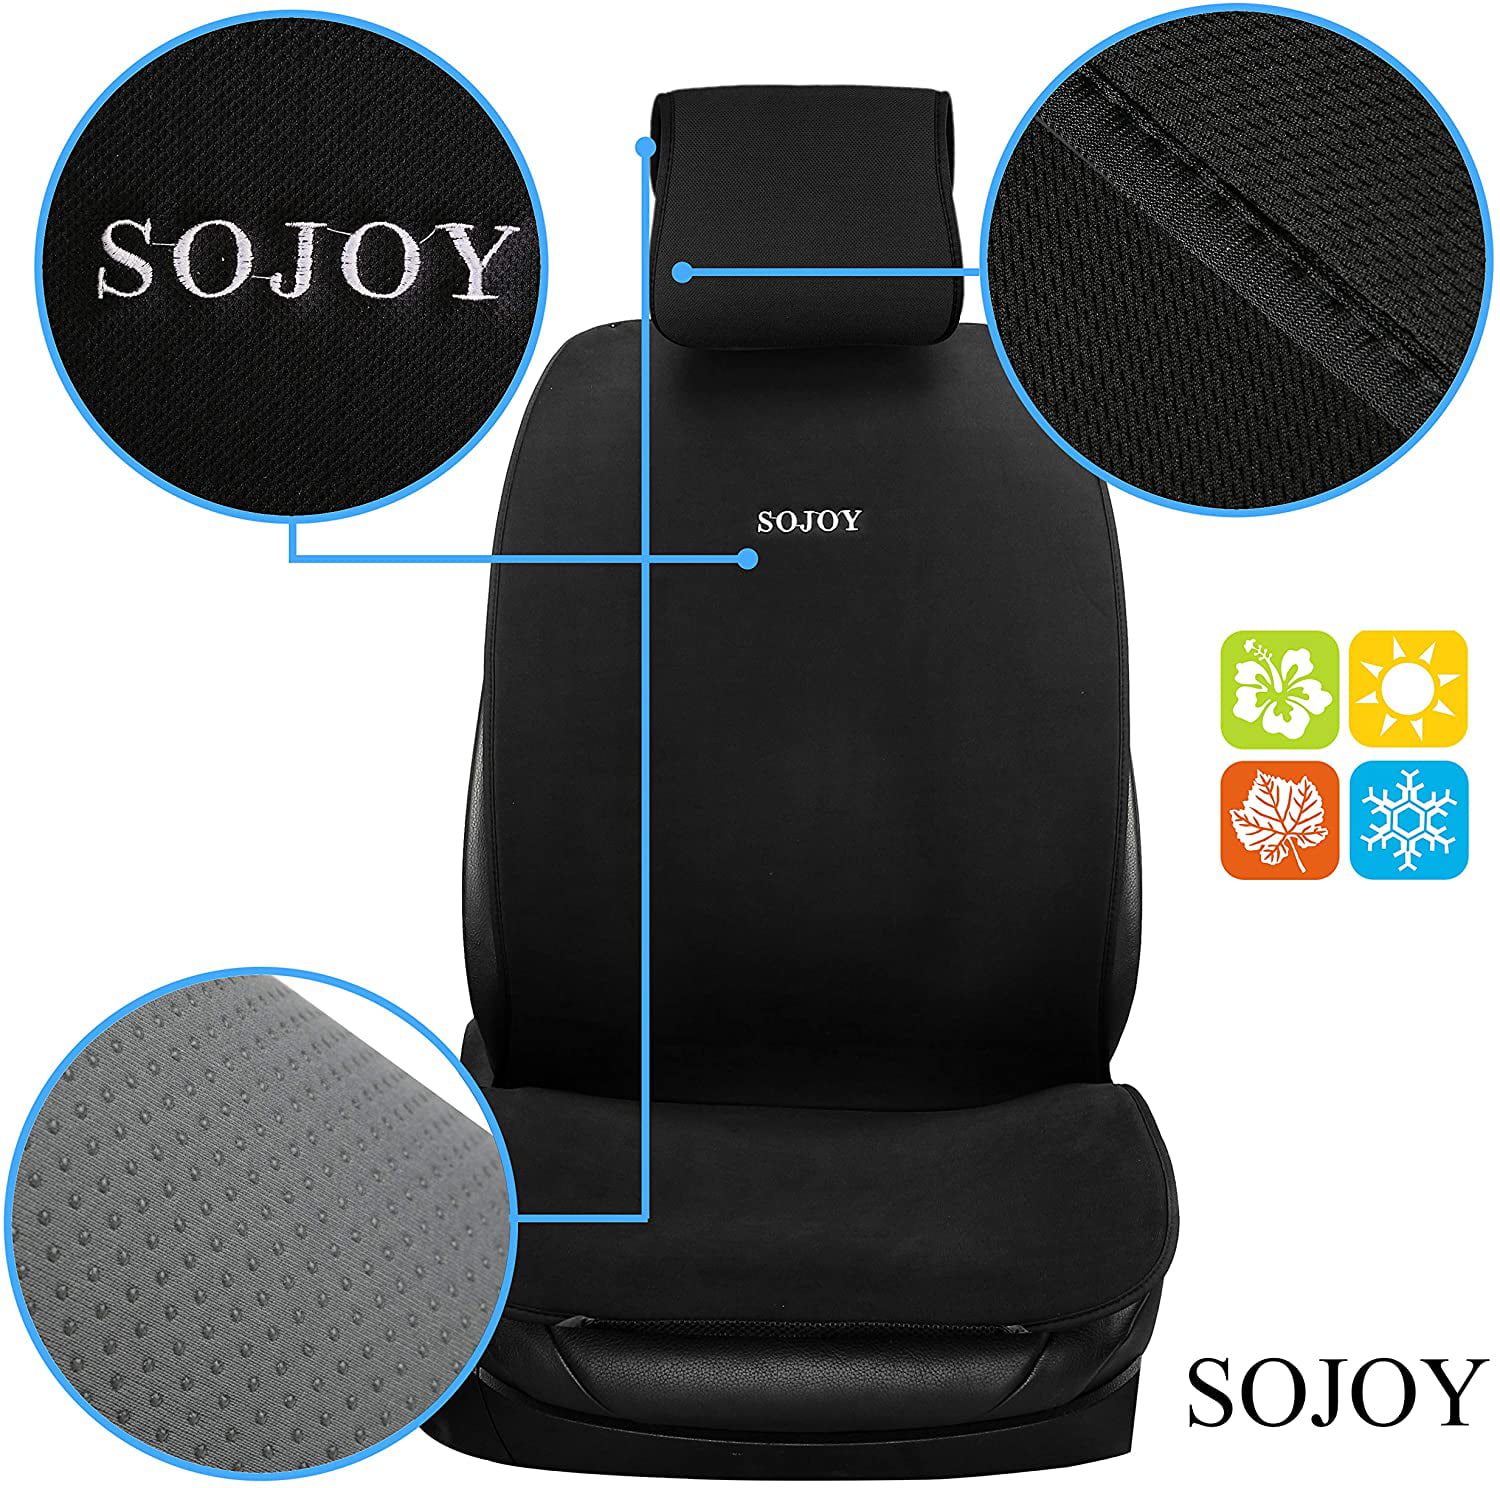 No-Slip Technology Car seat Protection for All Workouts Grey with Quick-Dry Microfiber Seat Protector All-Weather Sojoy IsoTowel Car Seat Cover 